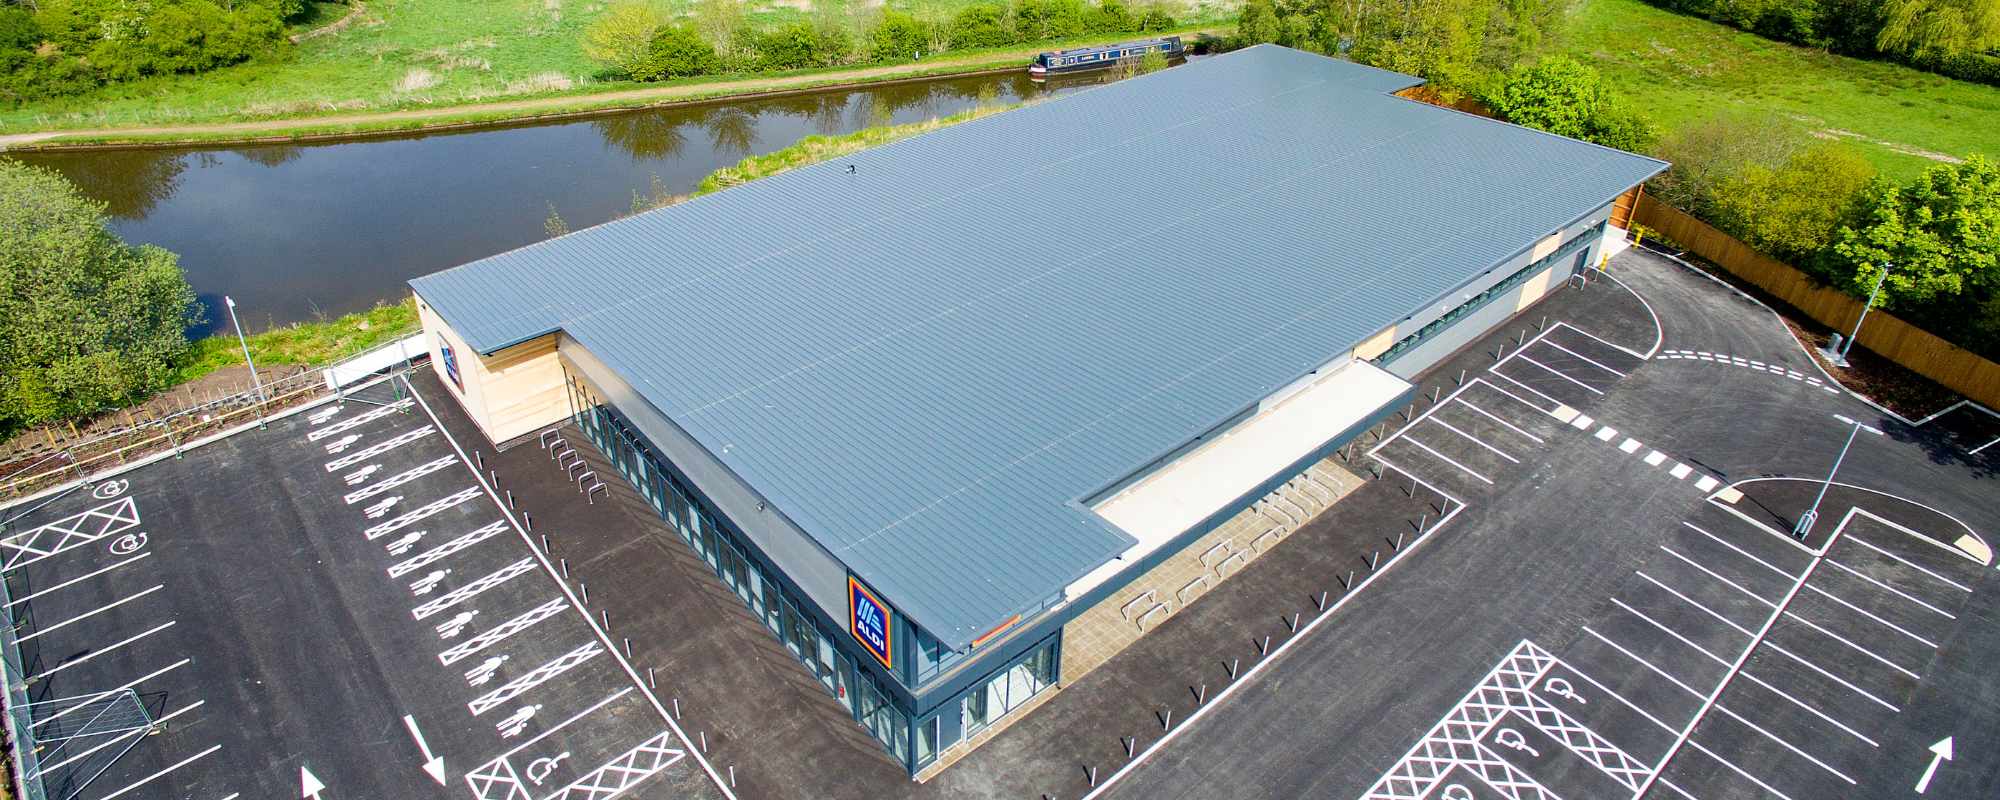 Aldi Whitchurch - Arial Rooftop Image